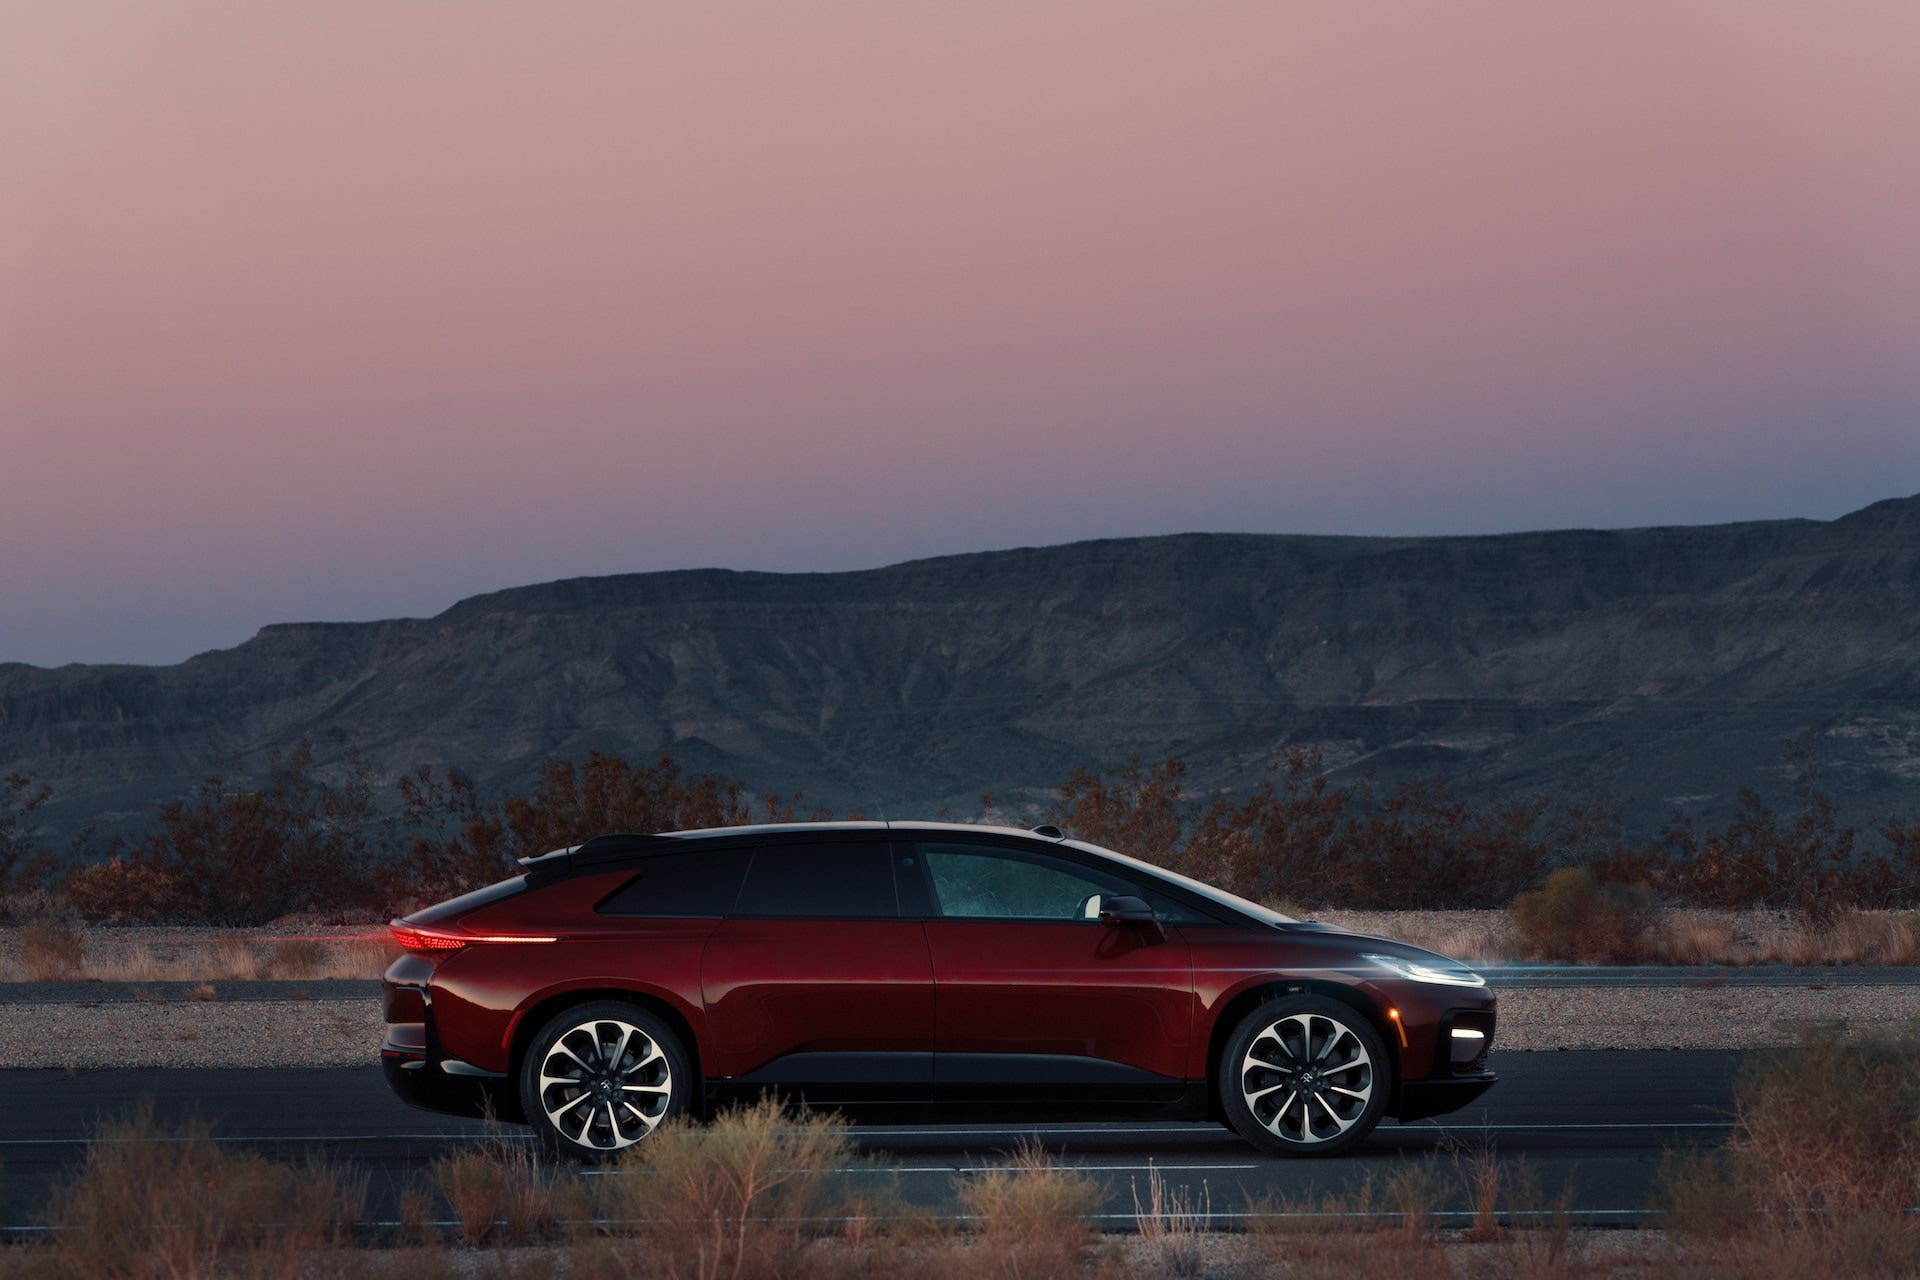 EV Firm Faraday Future Gains After Replacing CEO